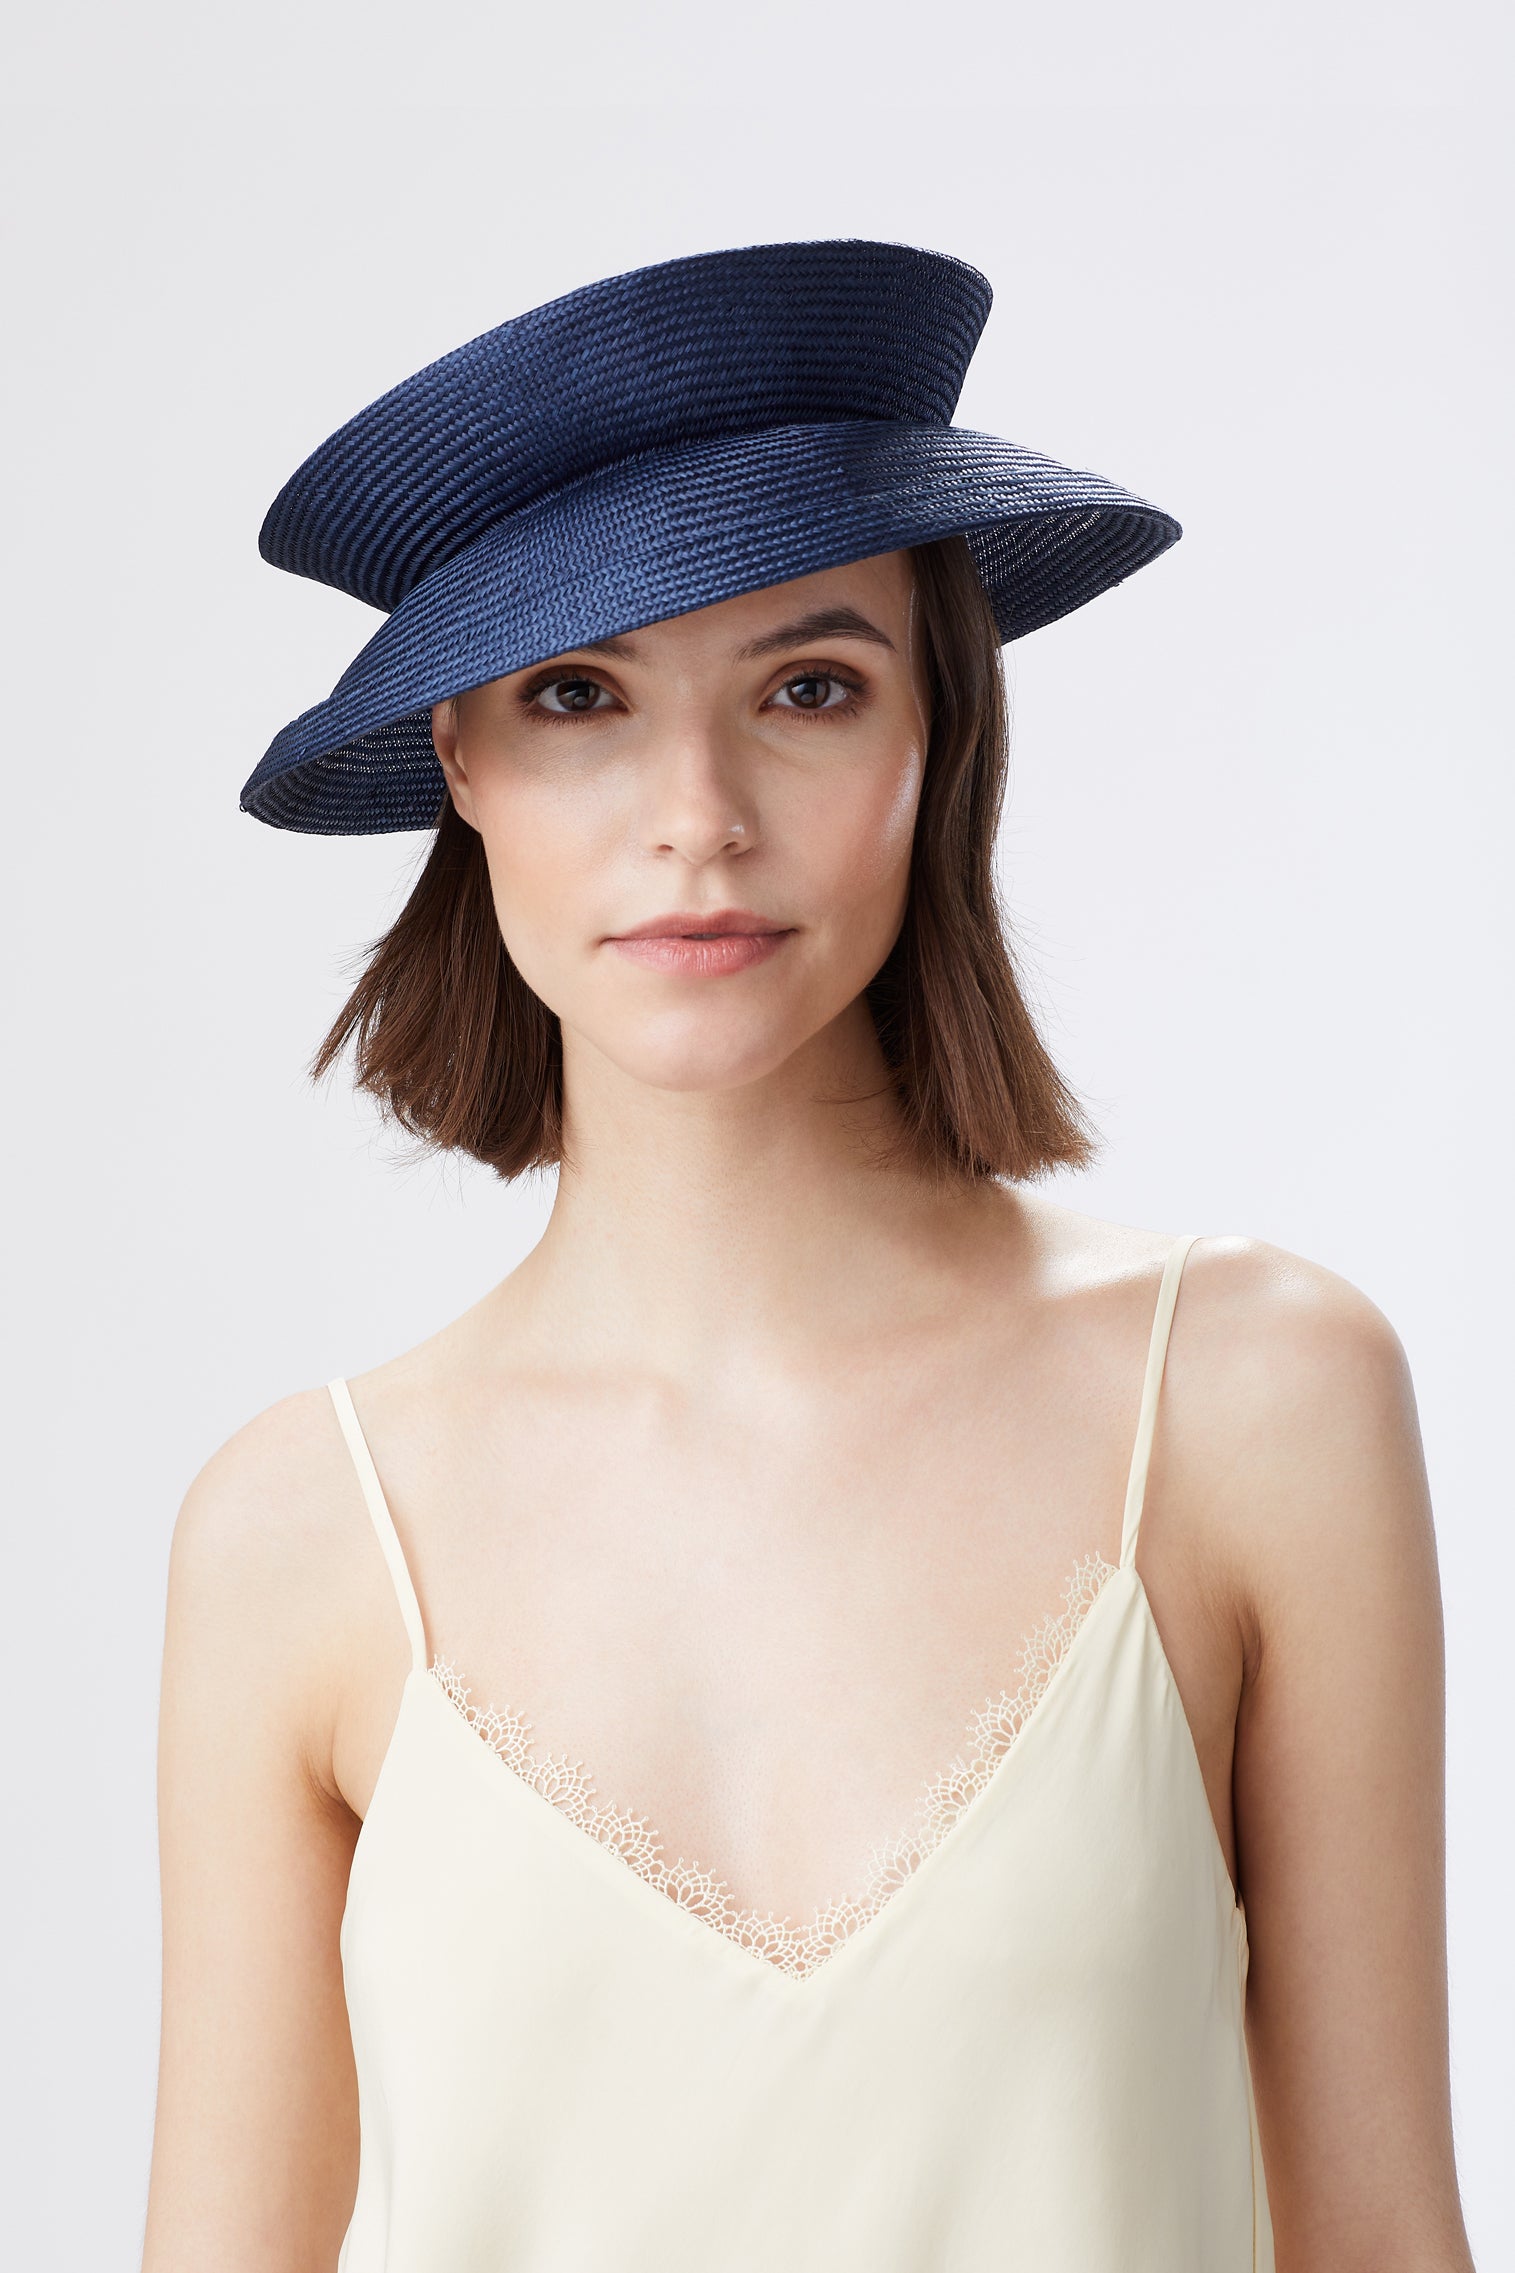 Pack'n'Go Collapsible Sun Hat - Valentines Day Gift Ideas - Lock & Co. Hatters London UK